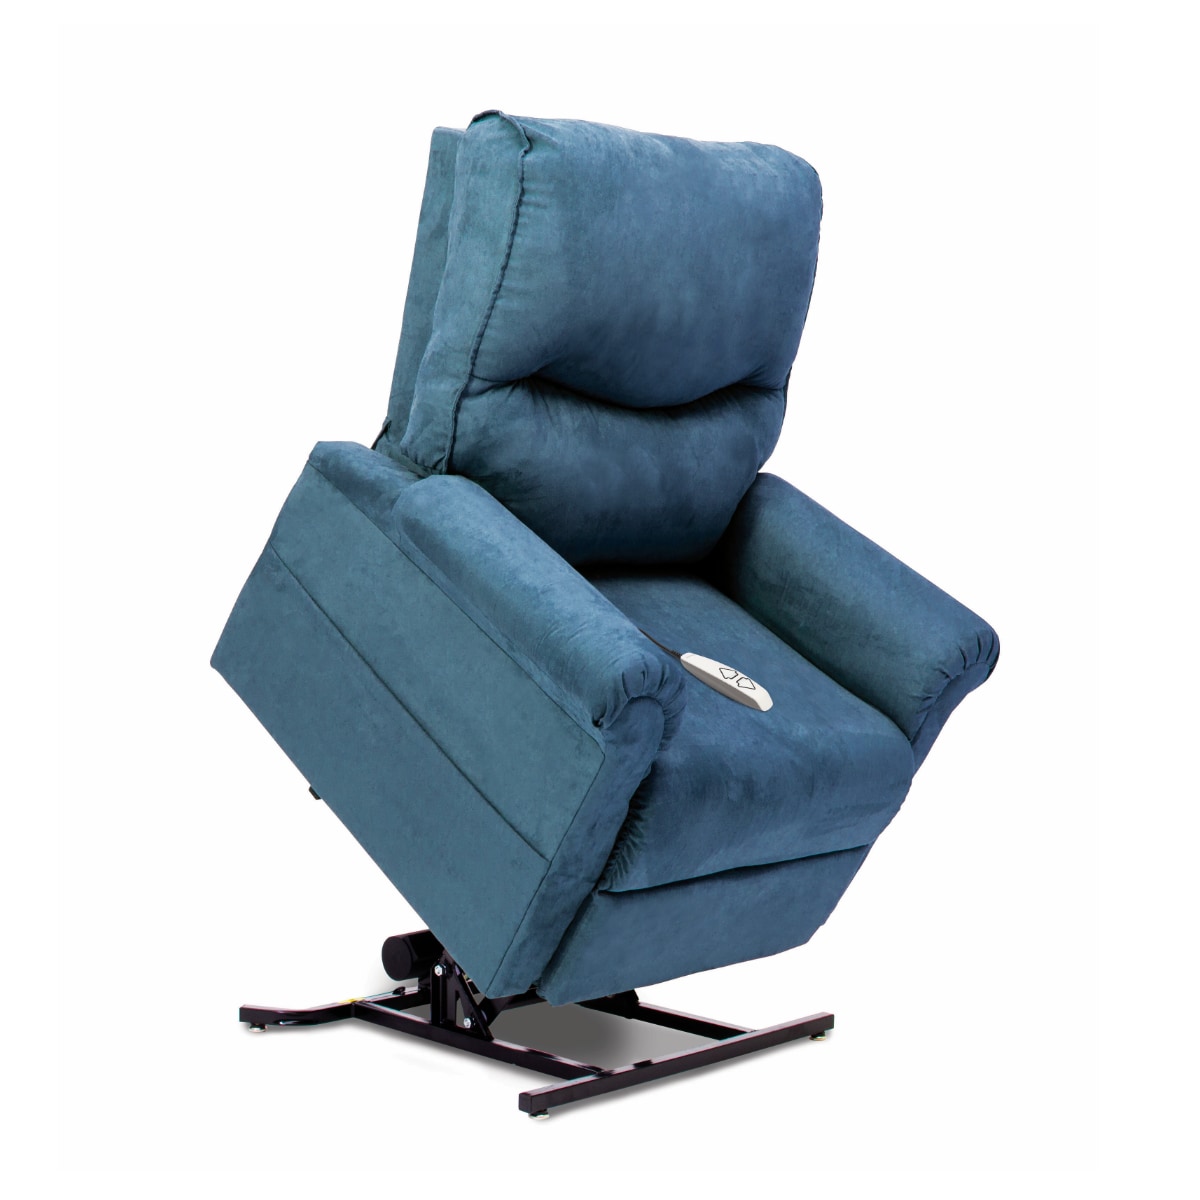 Blue suede lift chair in lift position